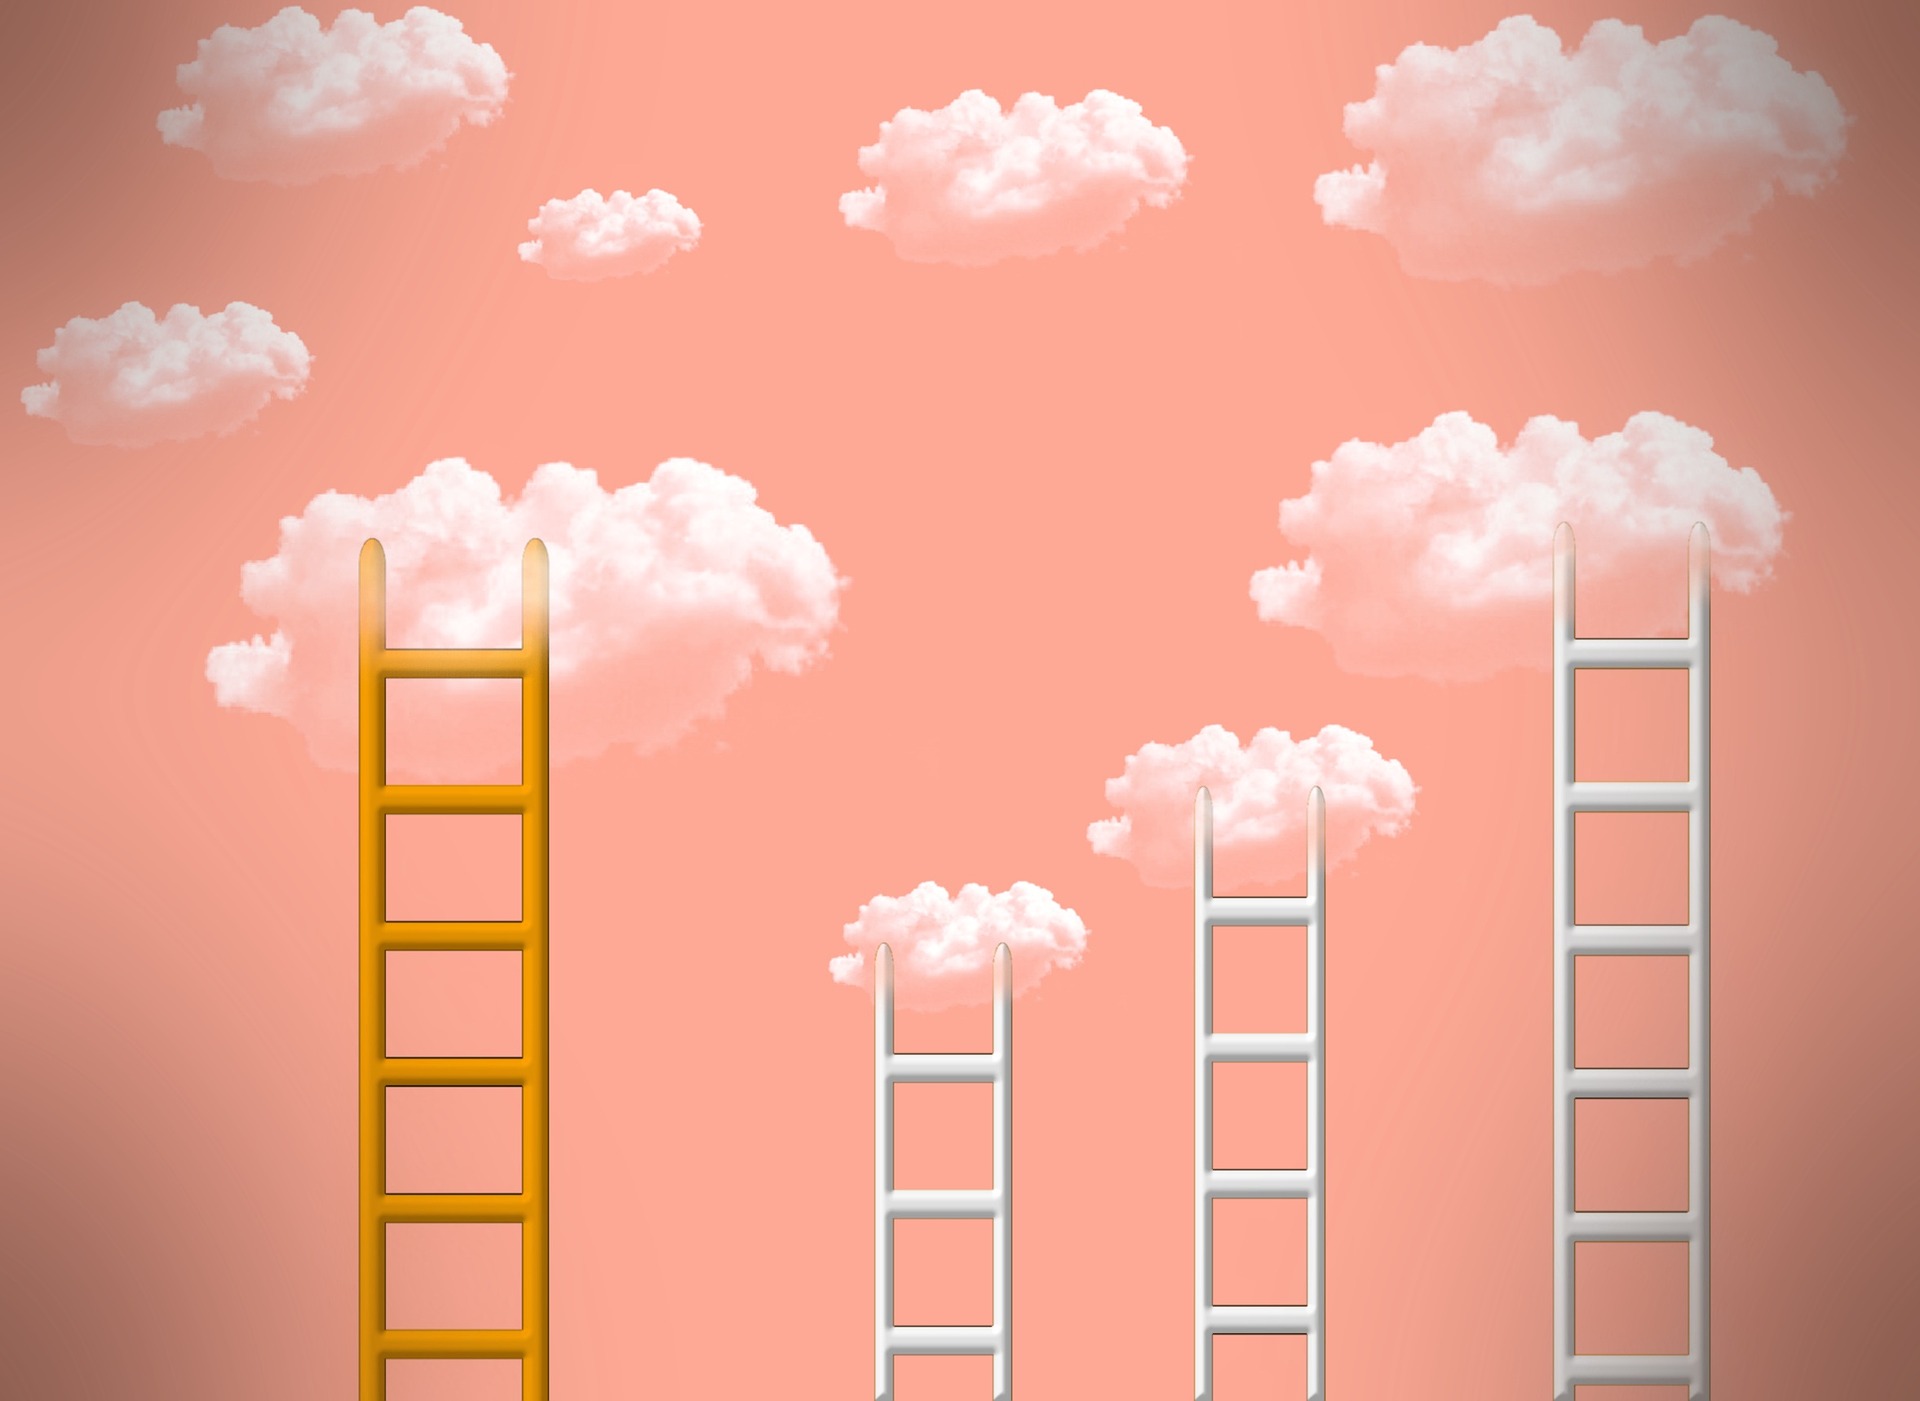 Four ladders at varying heights standing vertical against a pink cloud sky